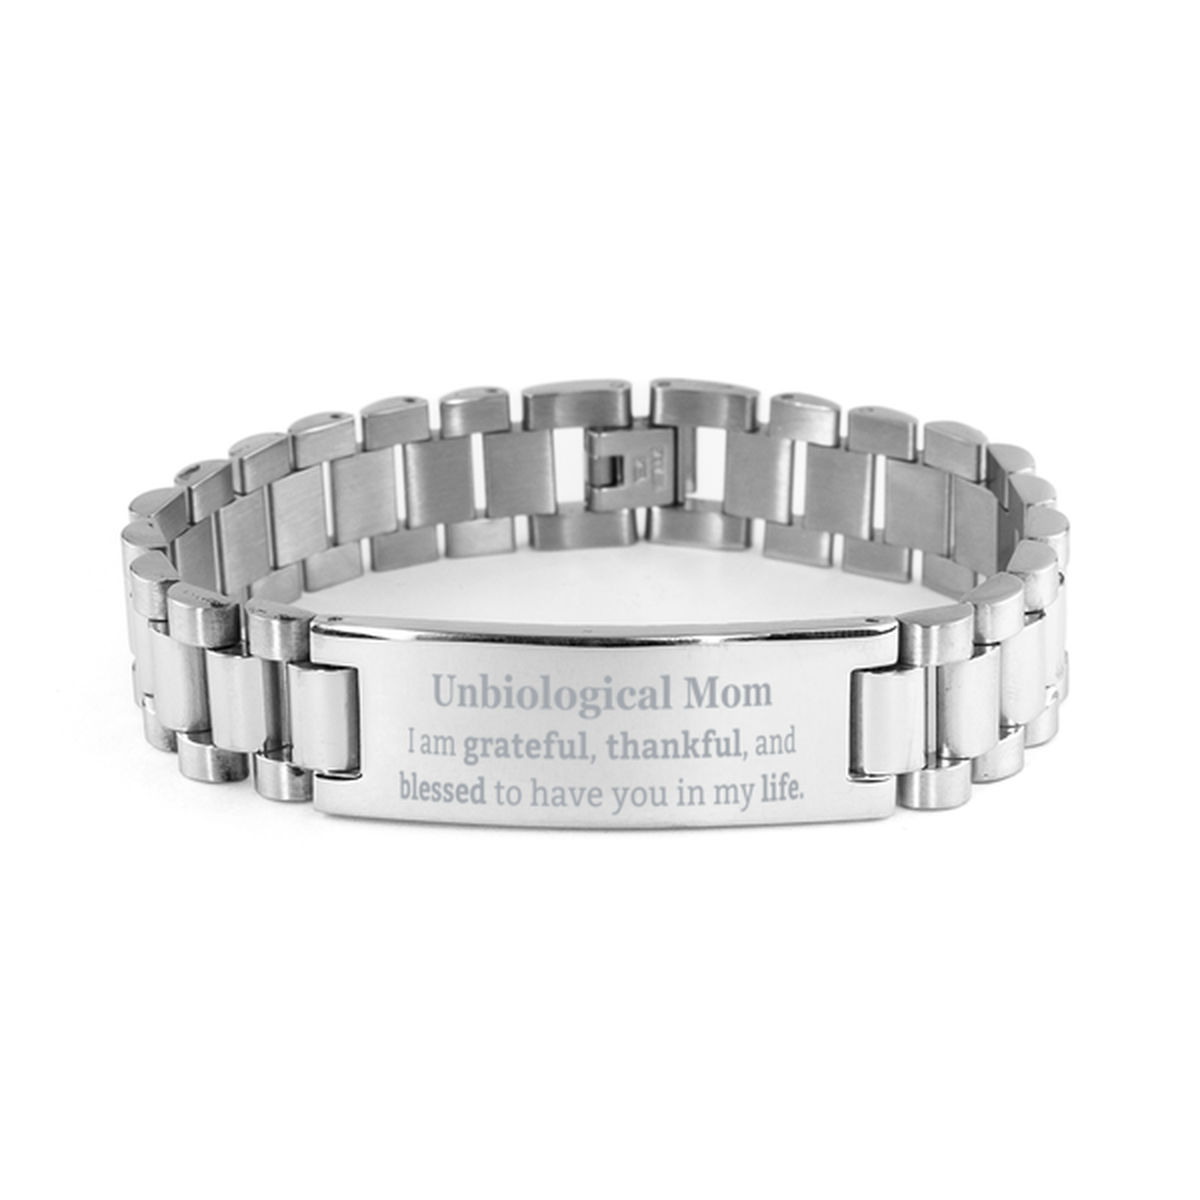 Unbiological Mom Appreciation Gifts, I am grateful, thankful, and blessed, Thank You Ladder Stainless Steel Bracelet for Unbiological Mom, Birthday Inspiration Gifts for Unbiological Mom